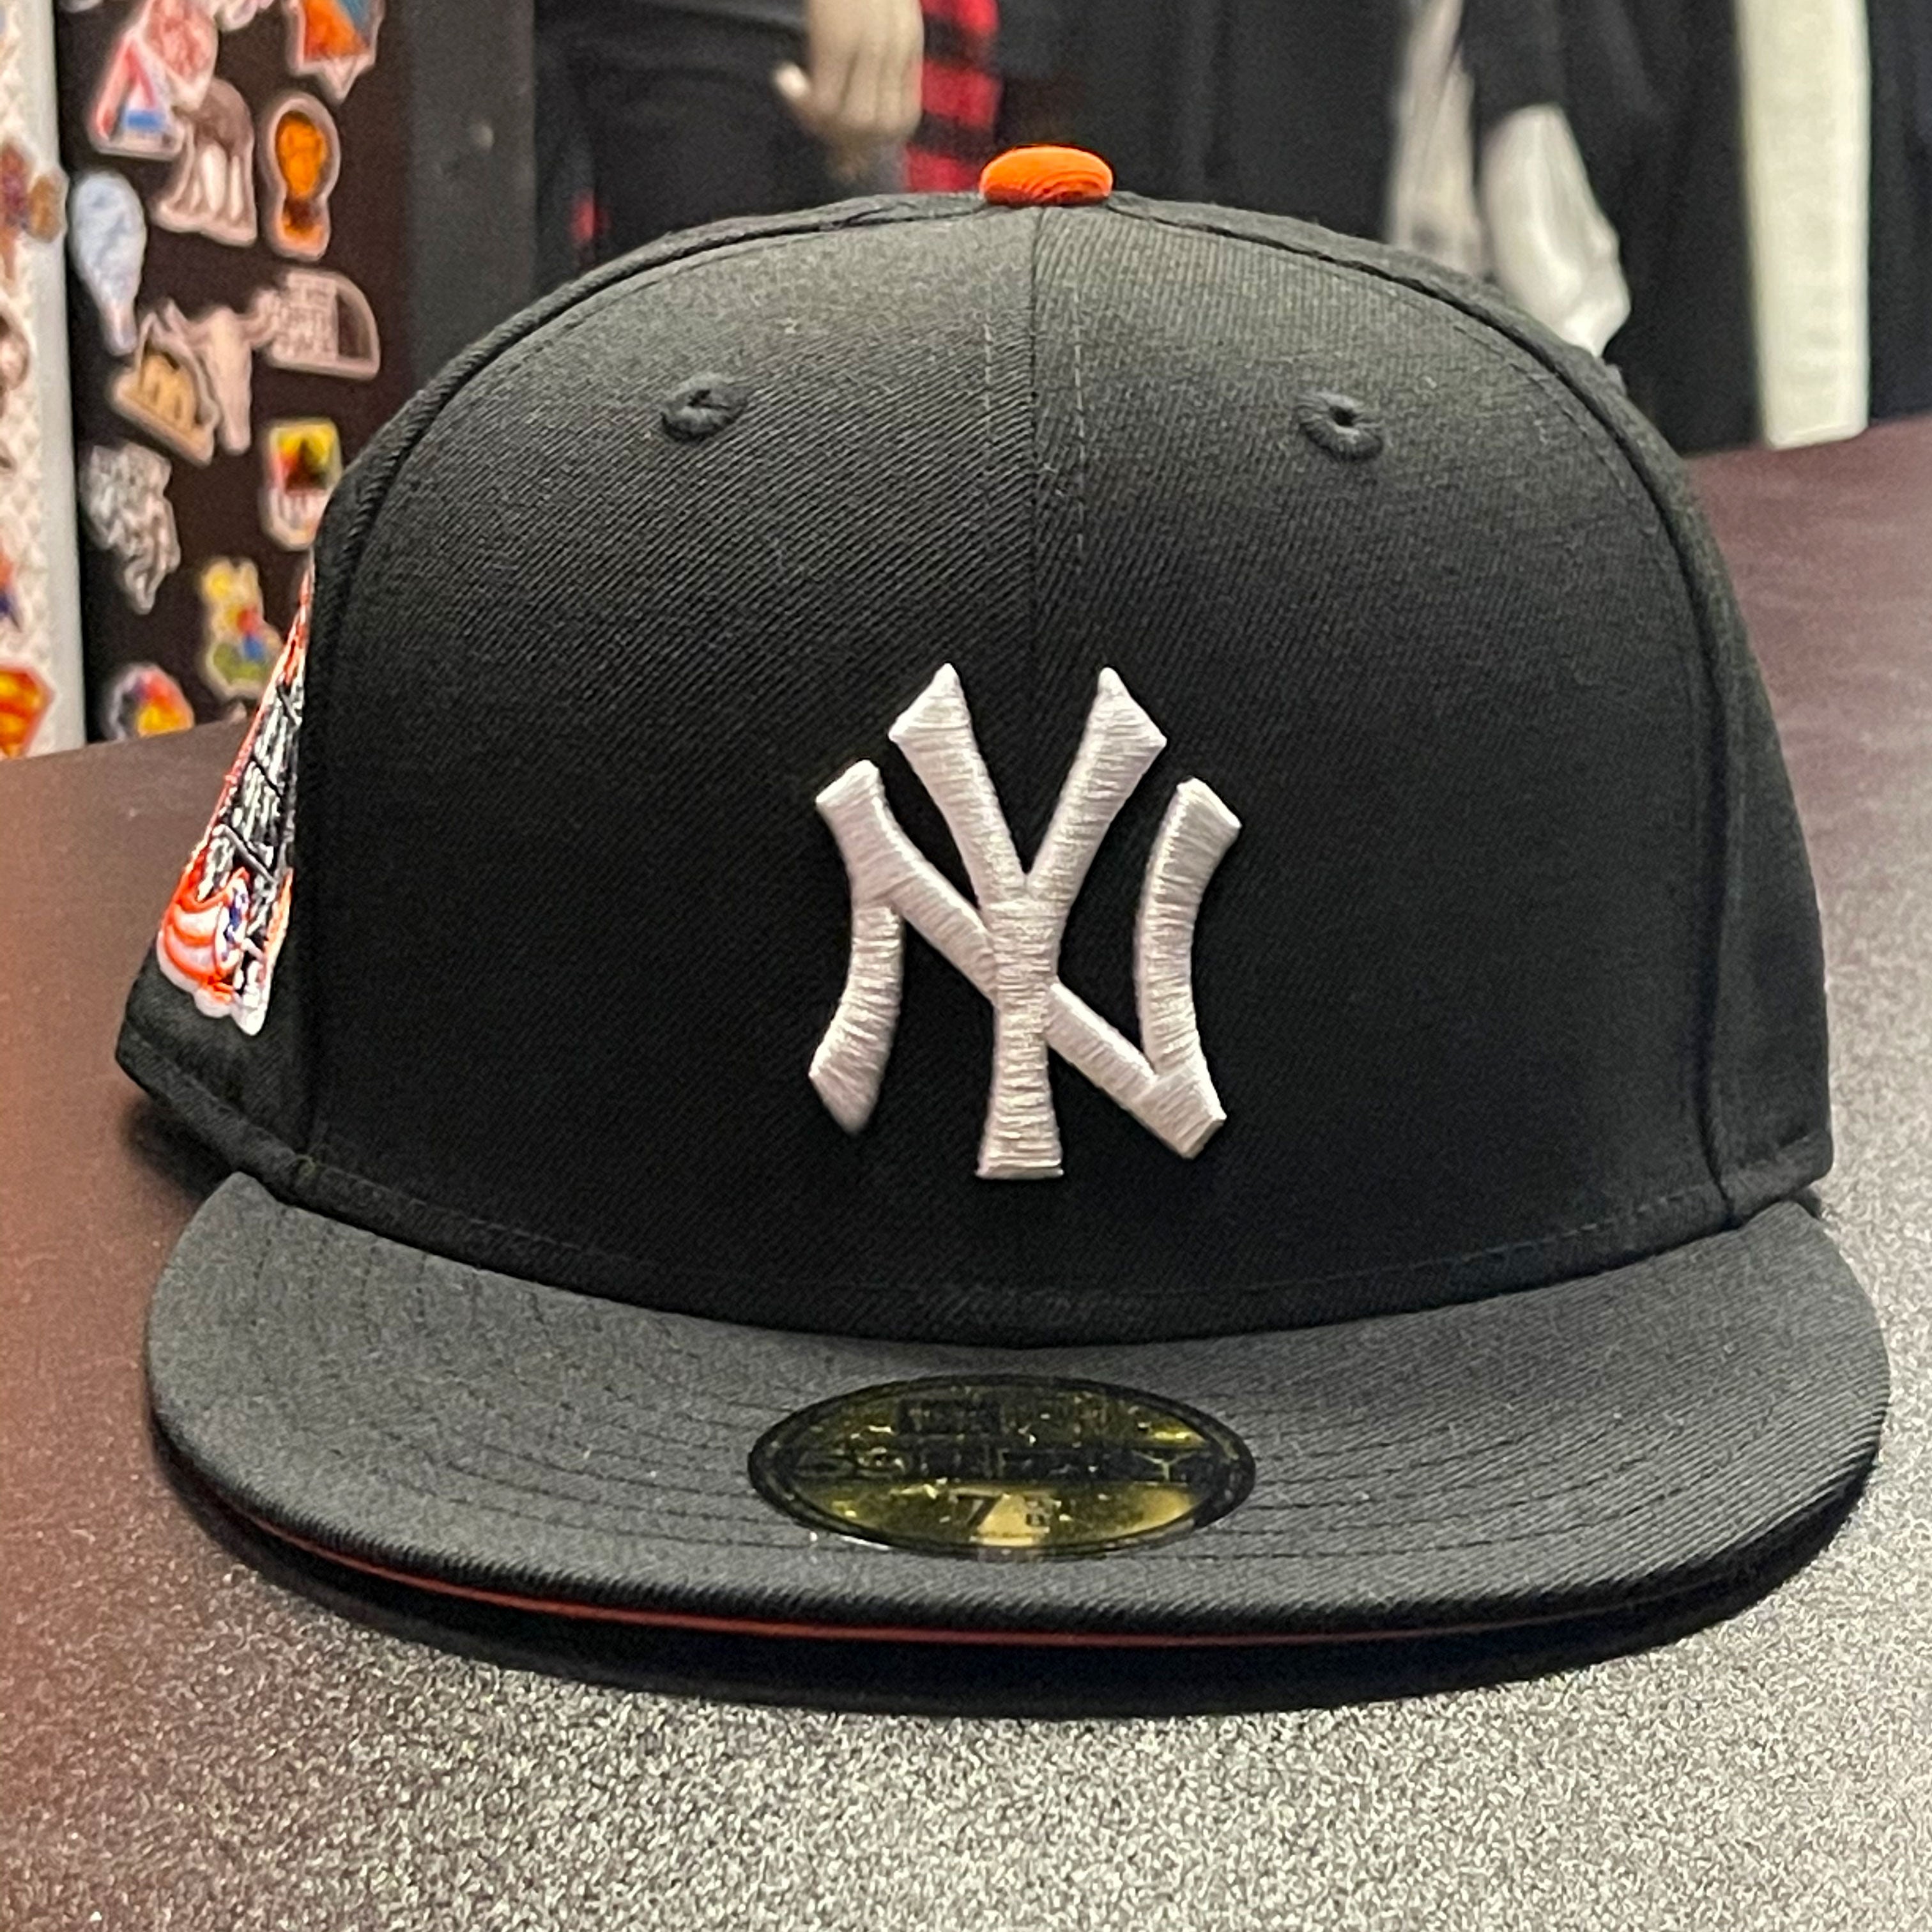 MM x Black Yankee Fitted